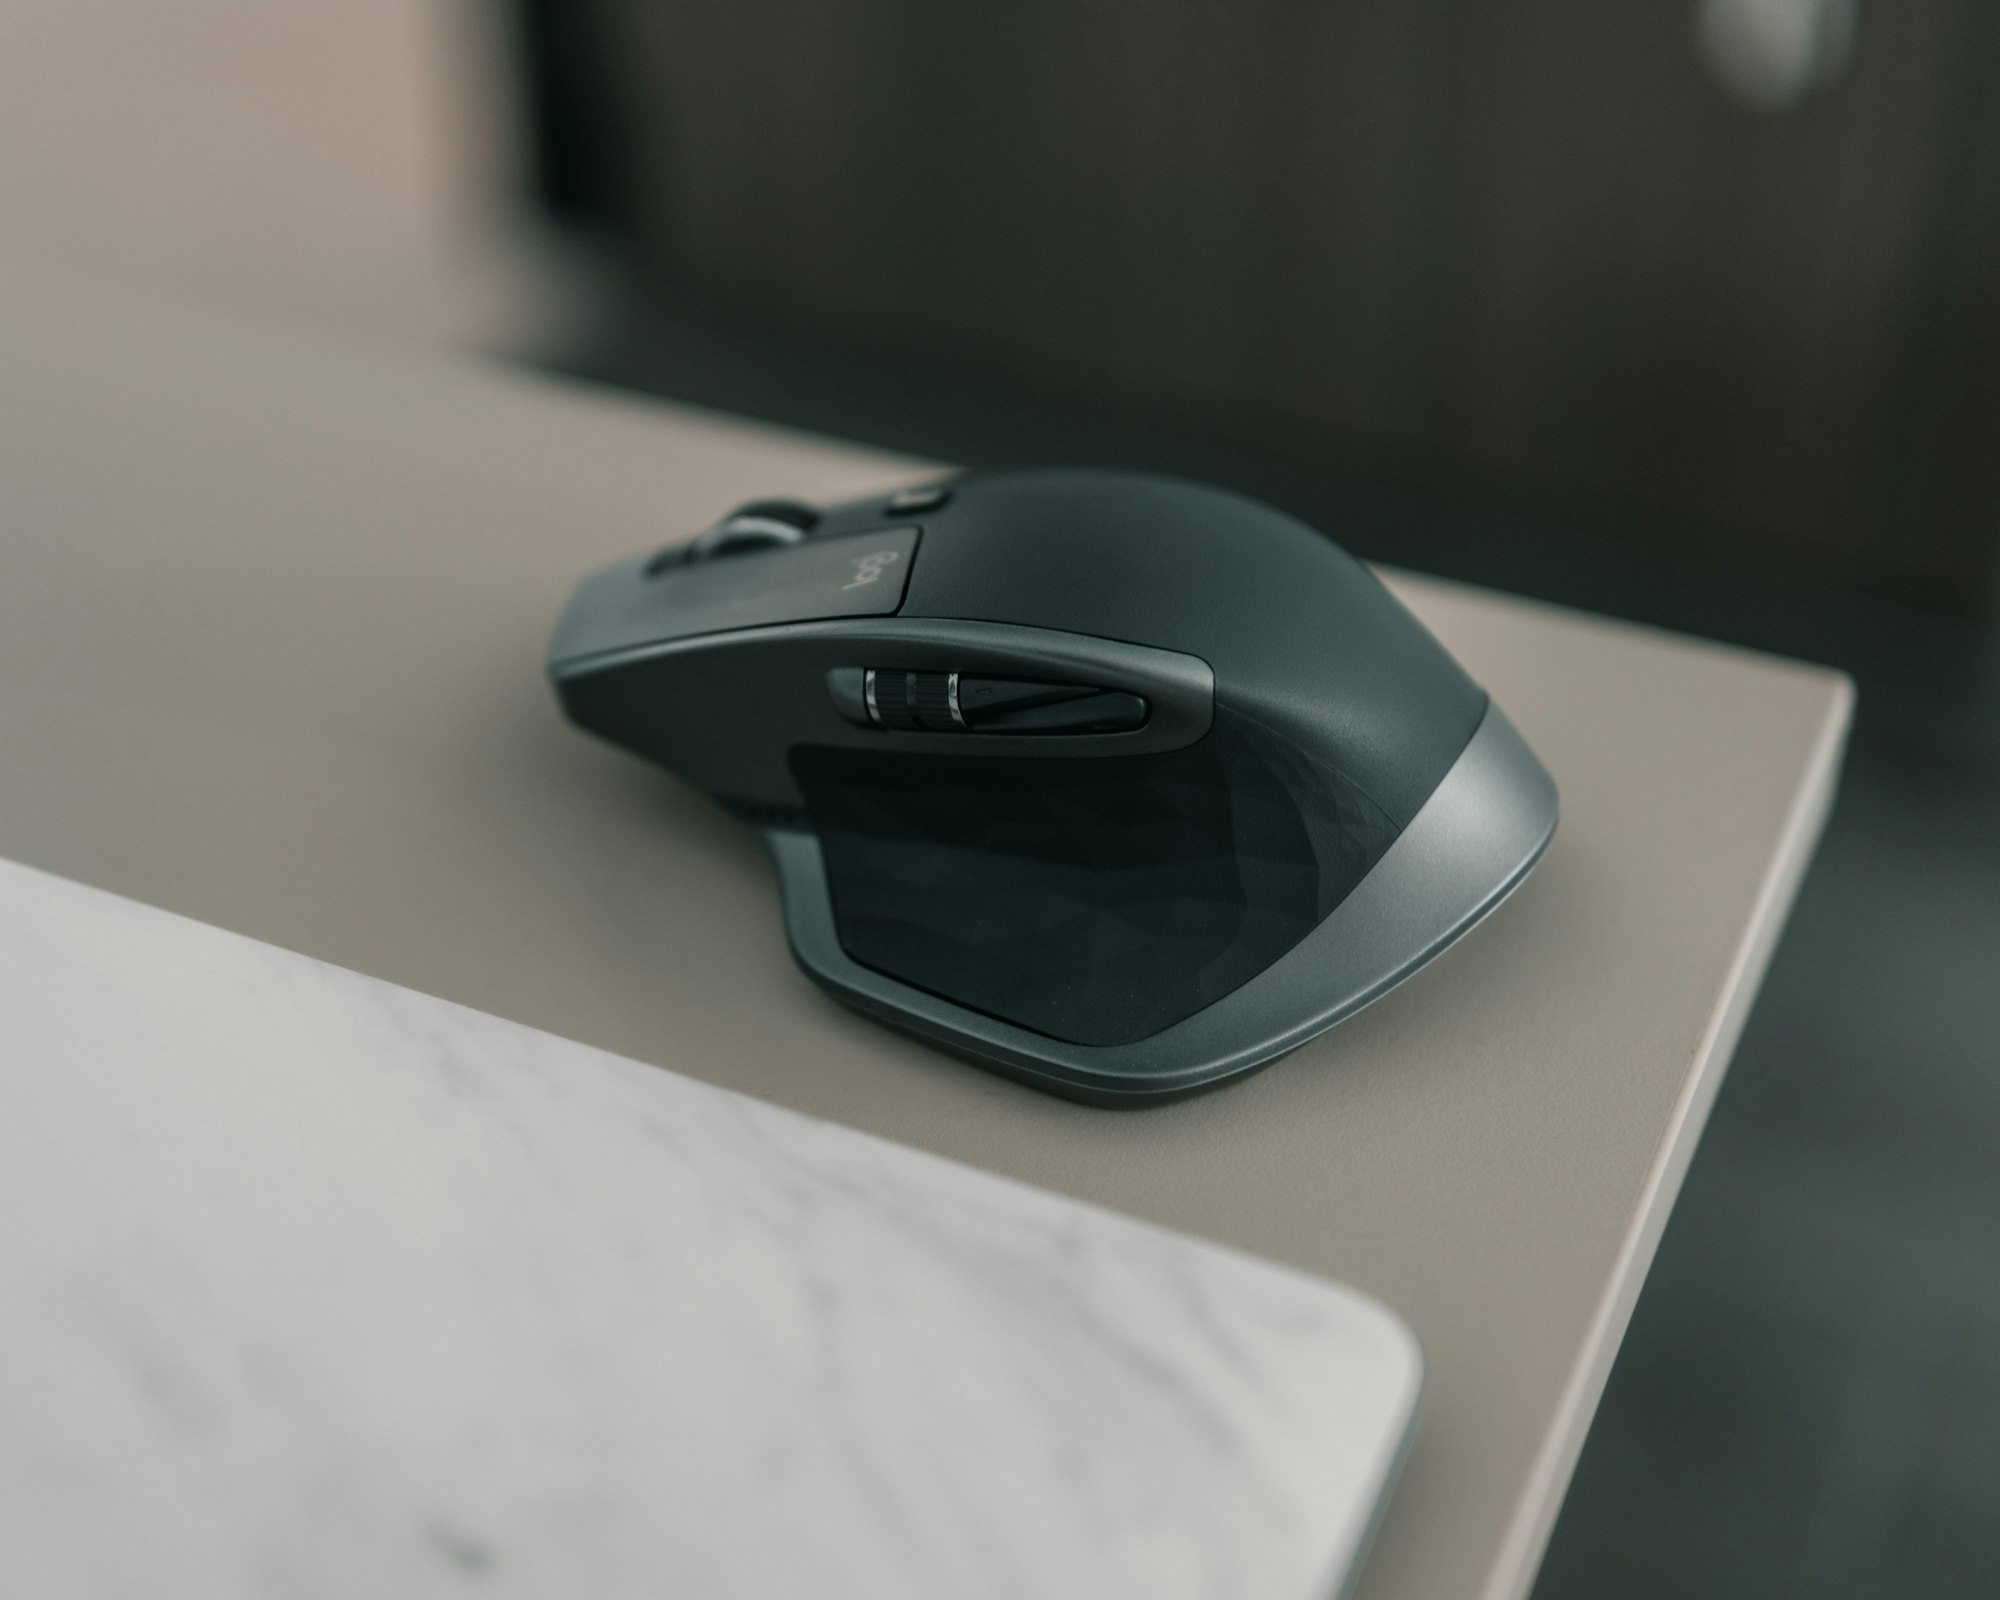 Logitech MX Master - The Best Mouse That Will Revolutionize Your Workspace